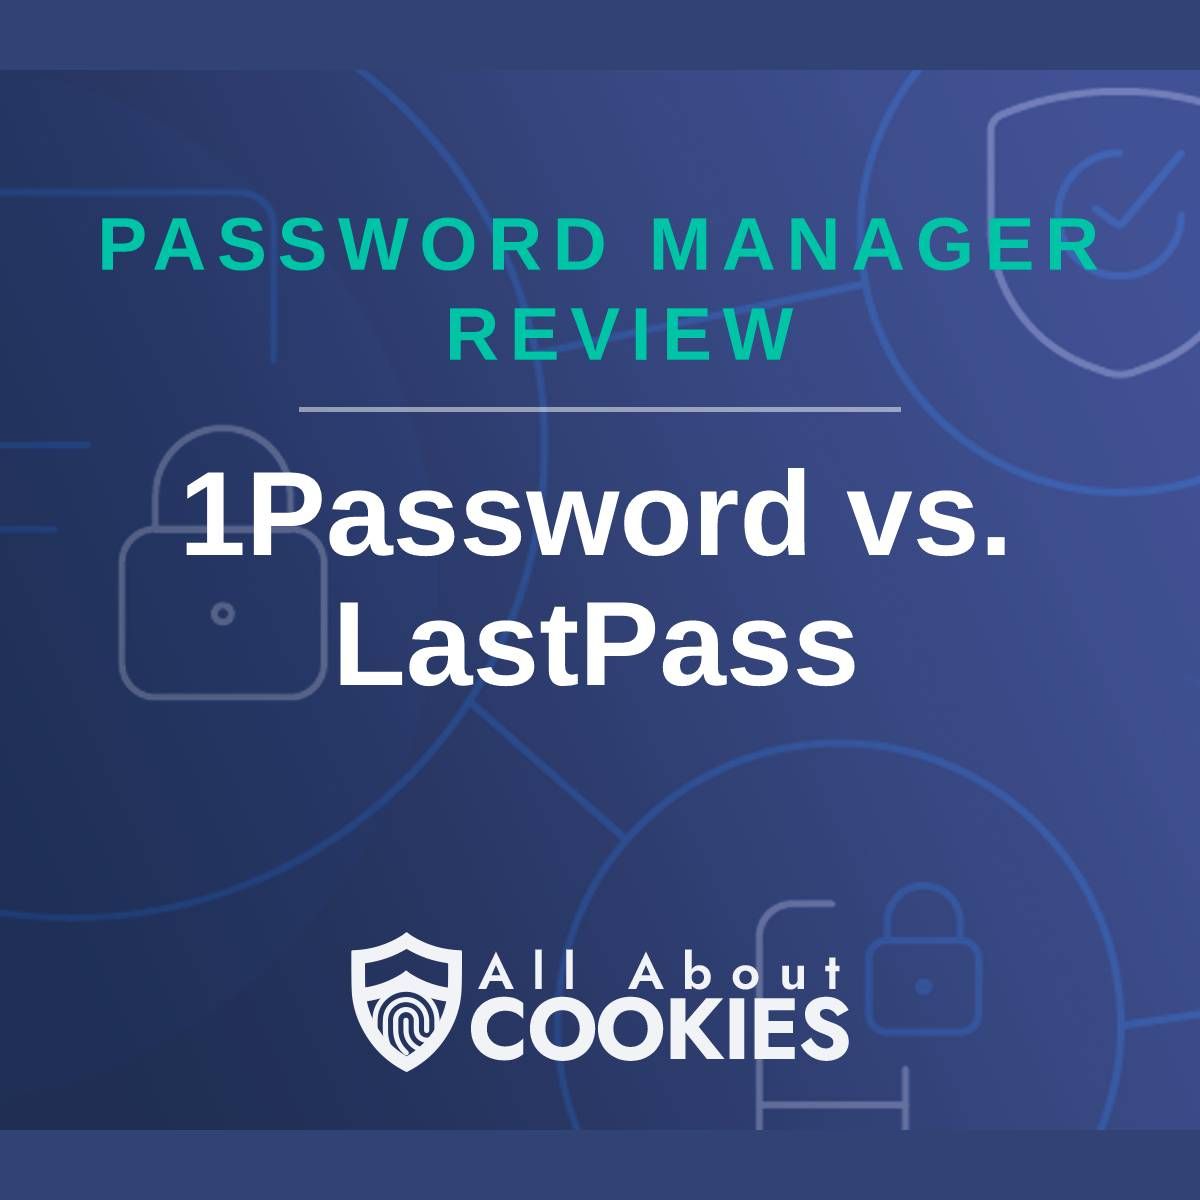 A blue background with images of locks and shields with the text &quot;Password Manager Review 1Password vs. LastPass&quot; and the All About Cookies logo. 